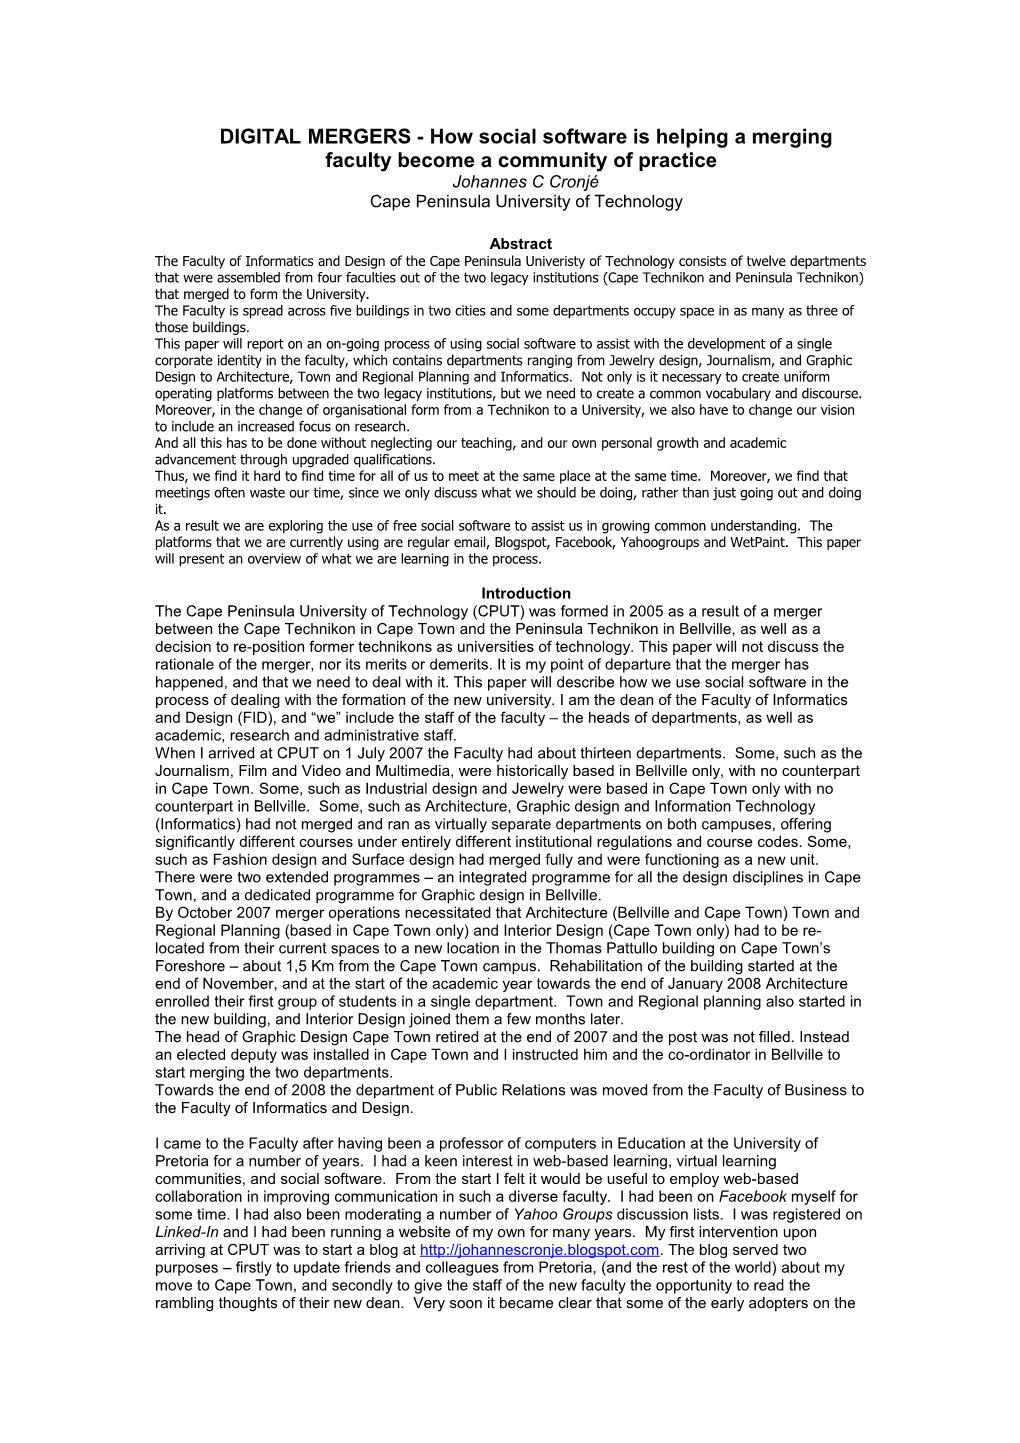 Format of Full Length Paper for SSWM 2004 International Conference